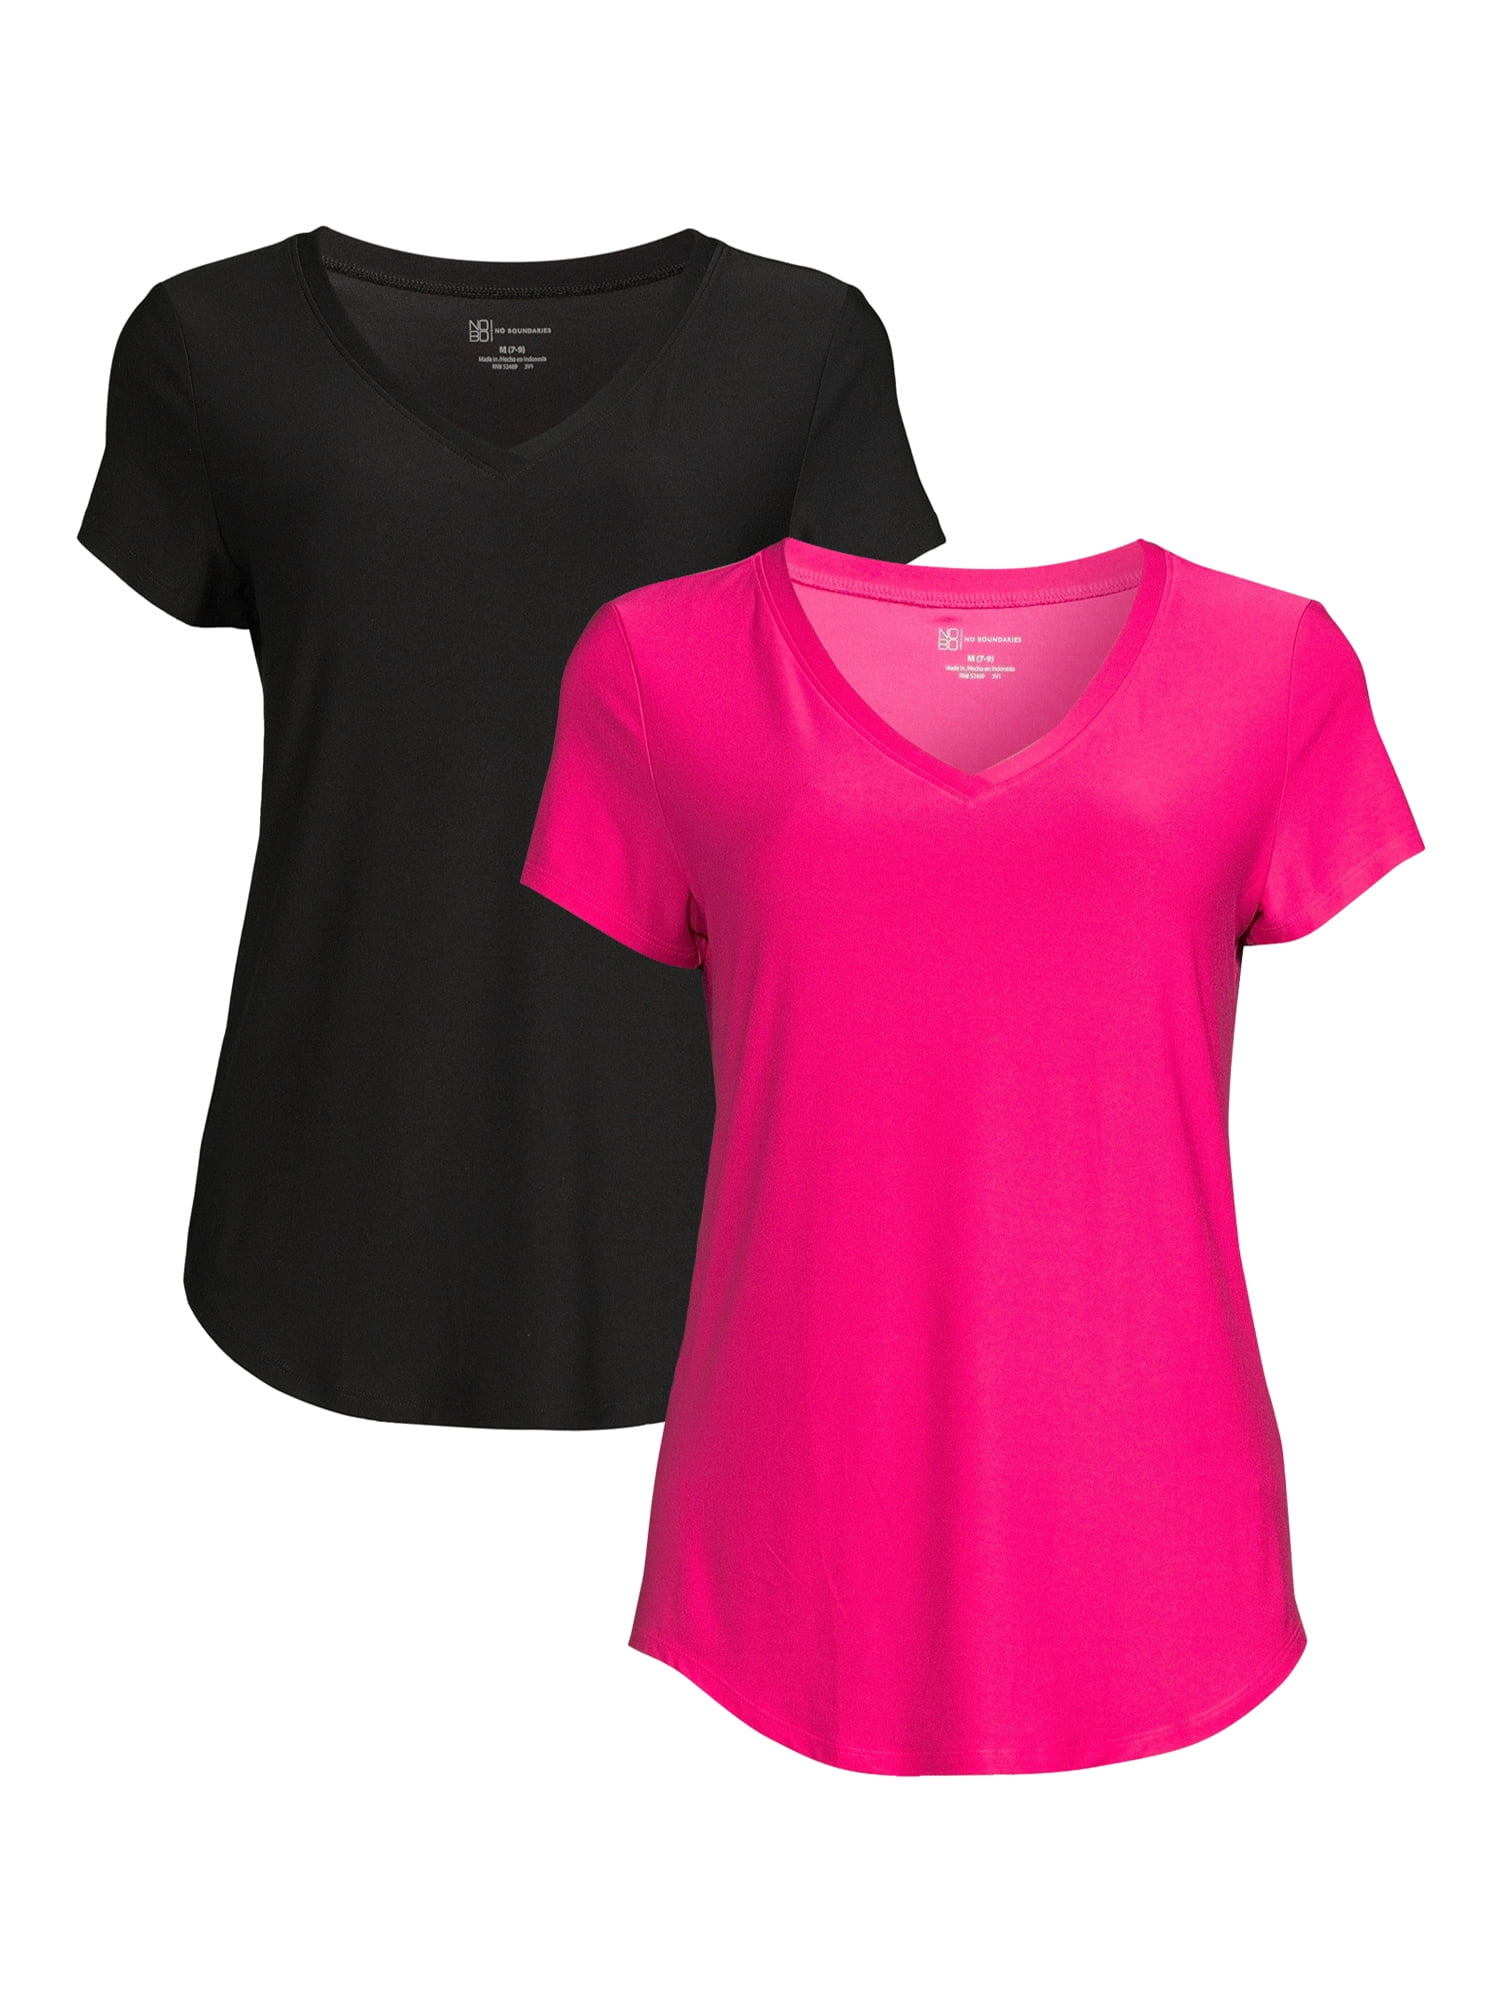 Brushed Juniors\' No Sleeves, Boundaries 2-Pack, V-Neck with Sizes T-Shirt Short XS-XXXL